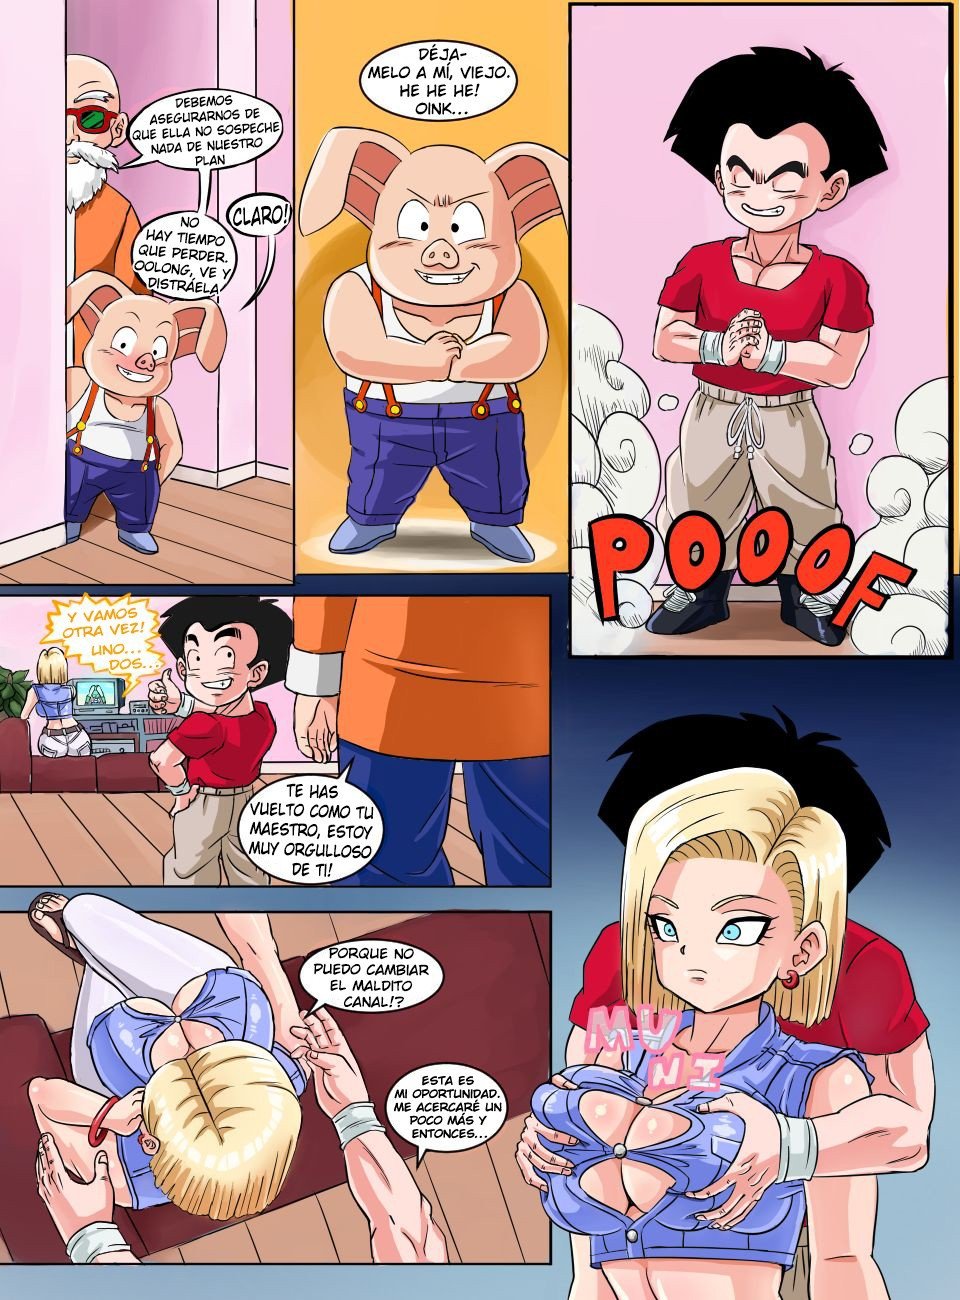 Android 18 is Alone - 2